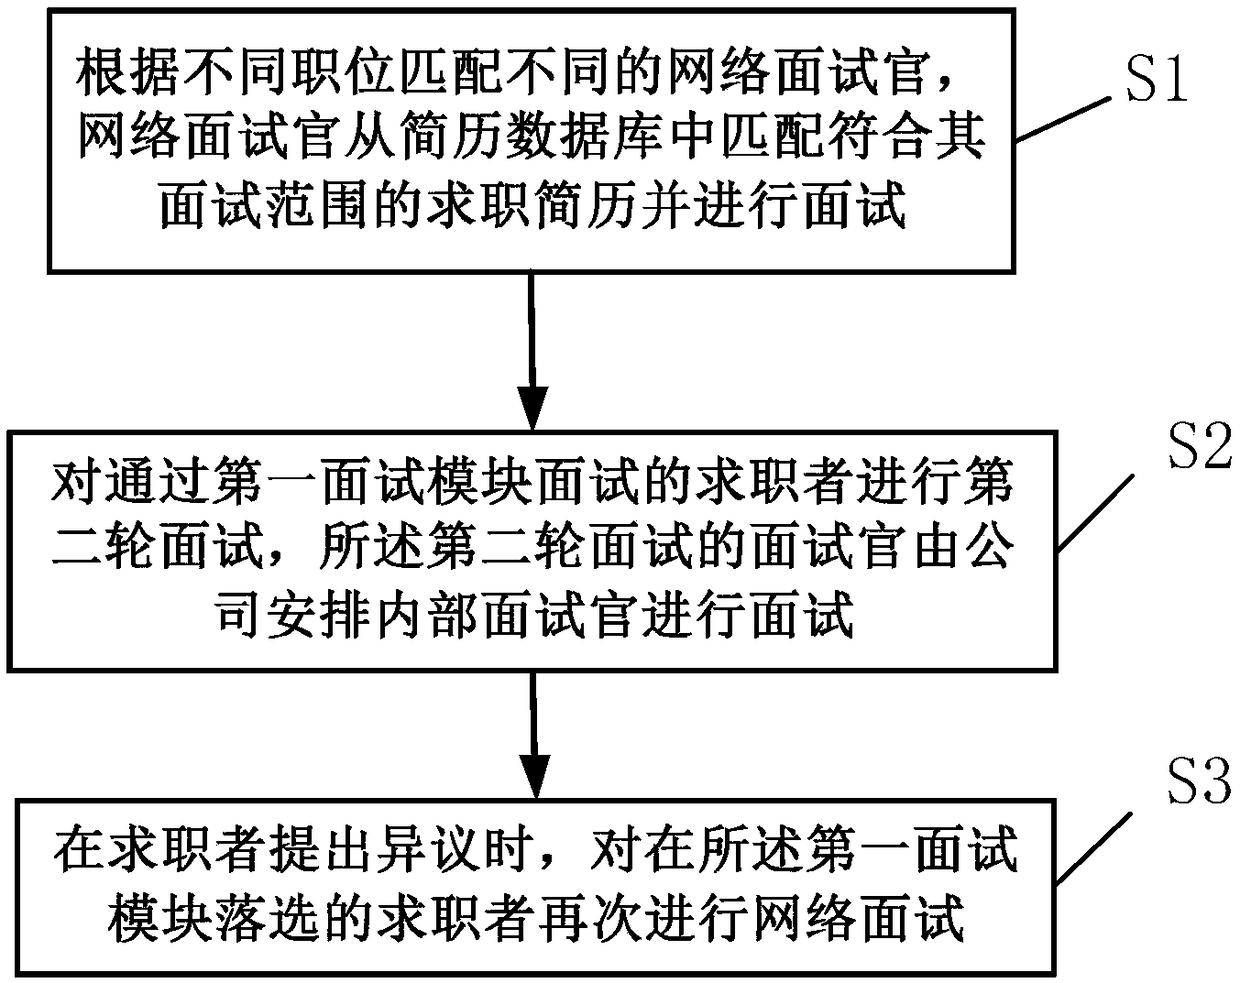 Online recruitment supervision and management system and method thereof